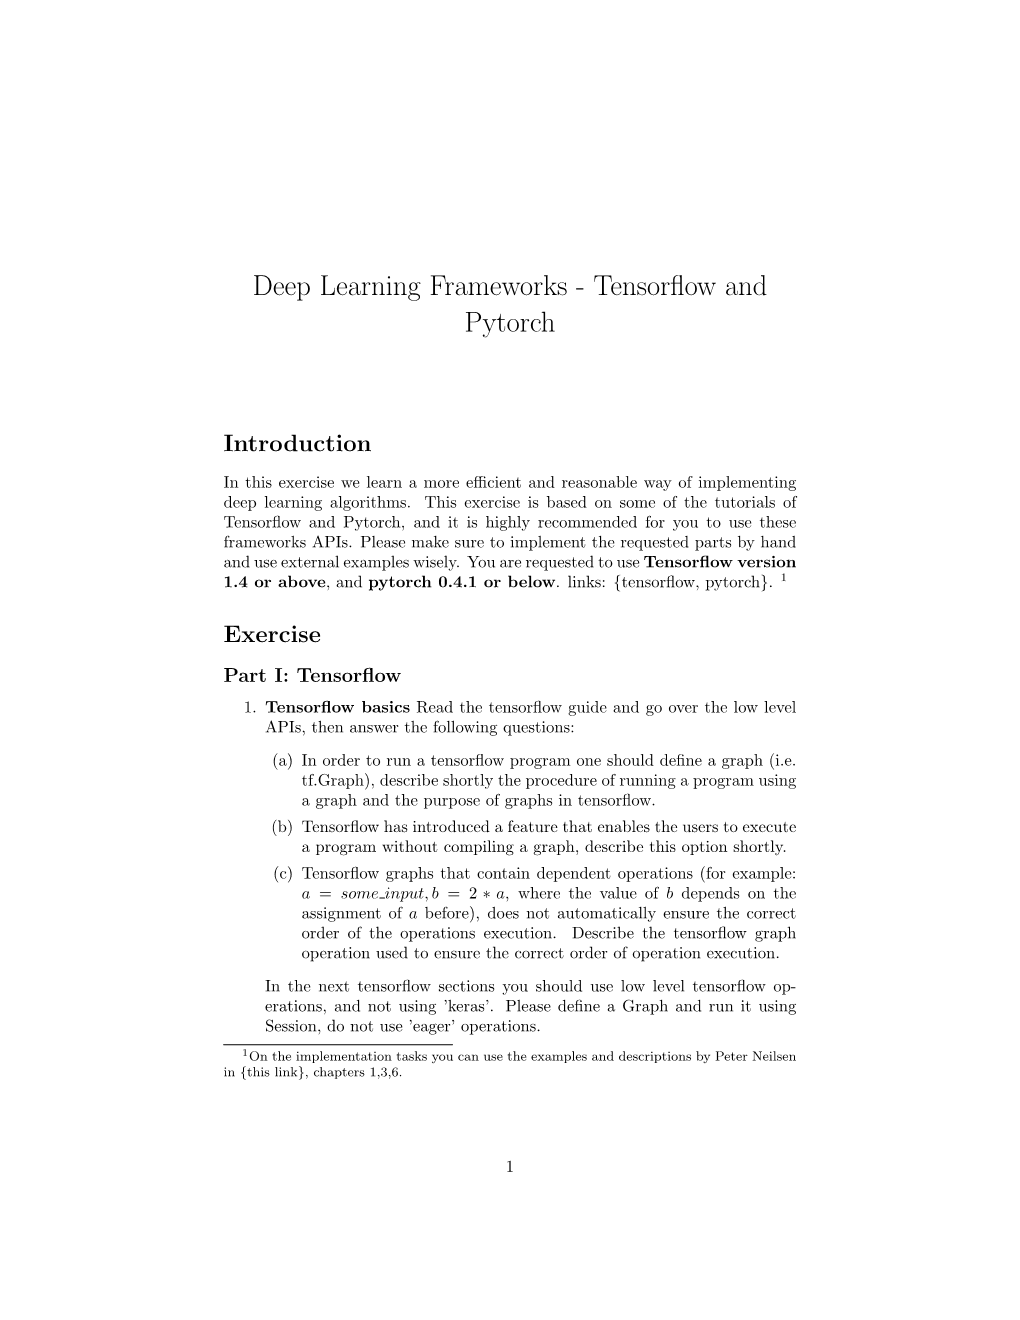 Tensorflow and Pytorch